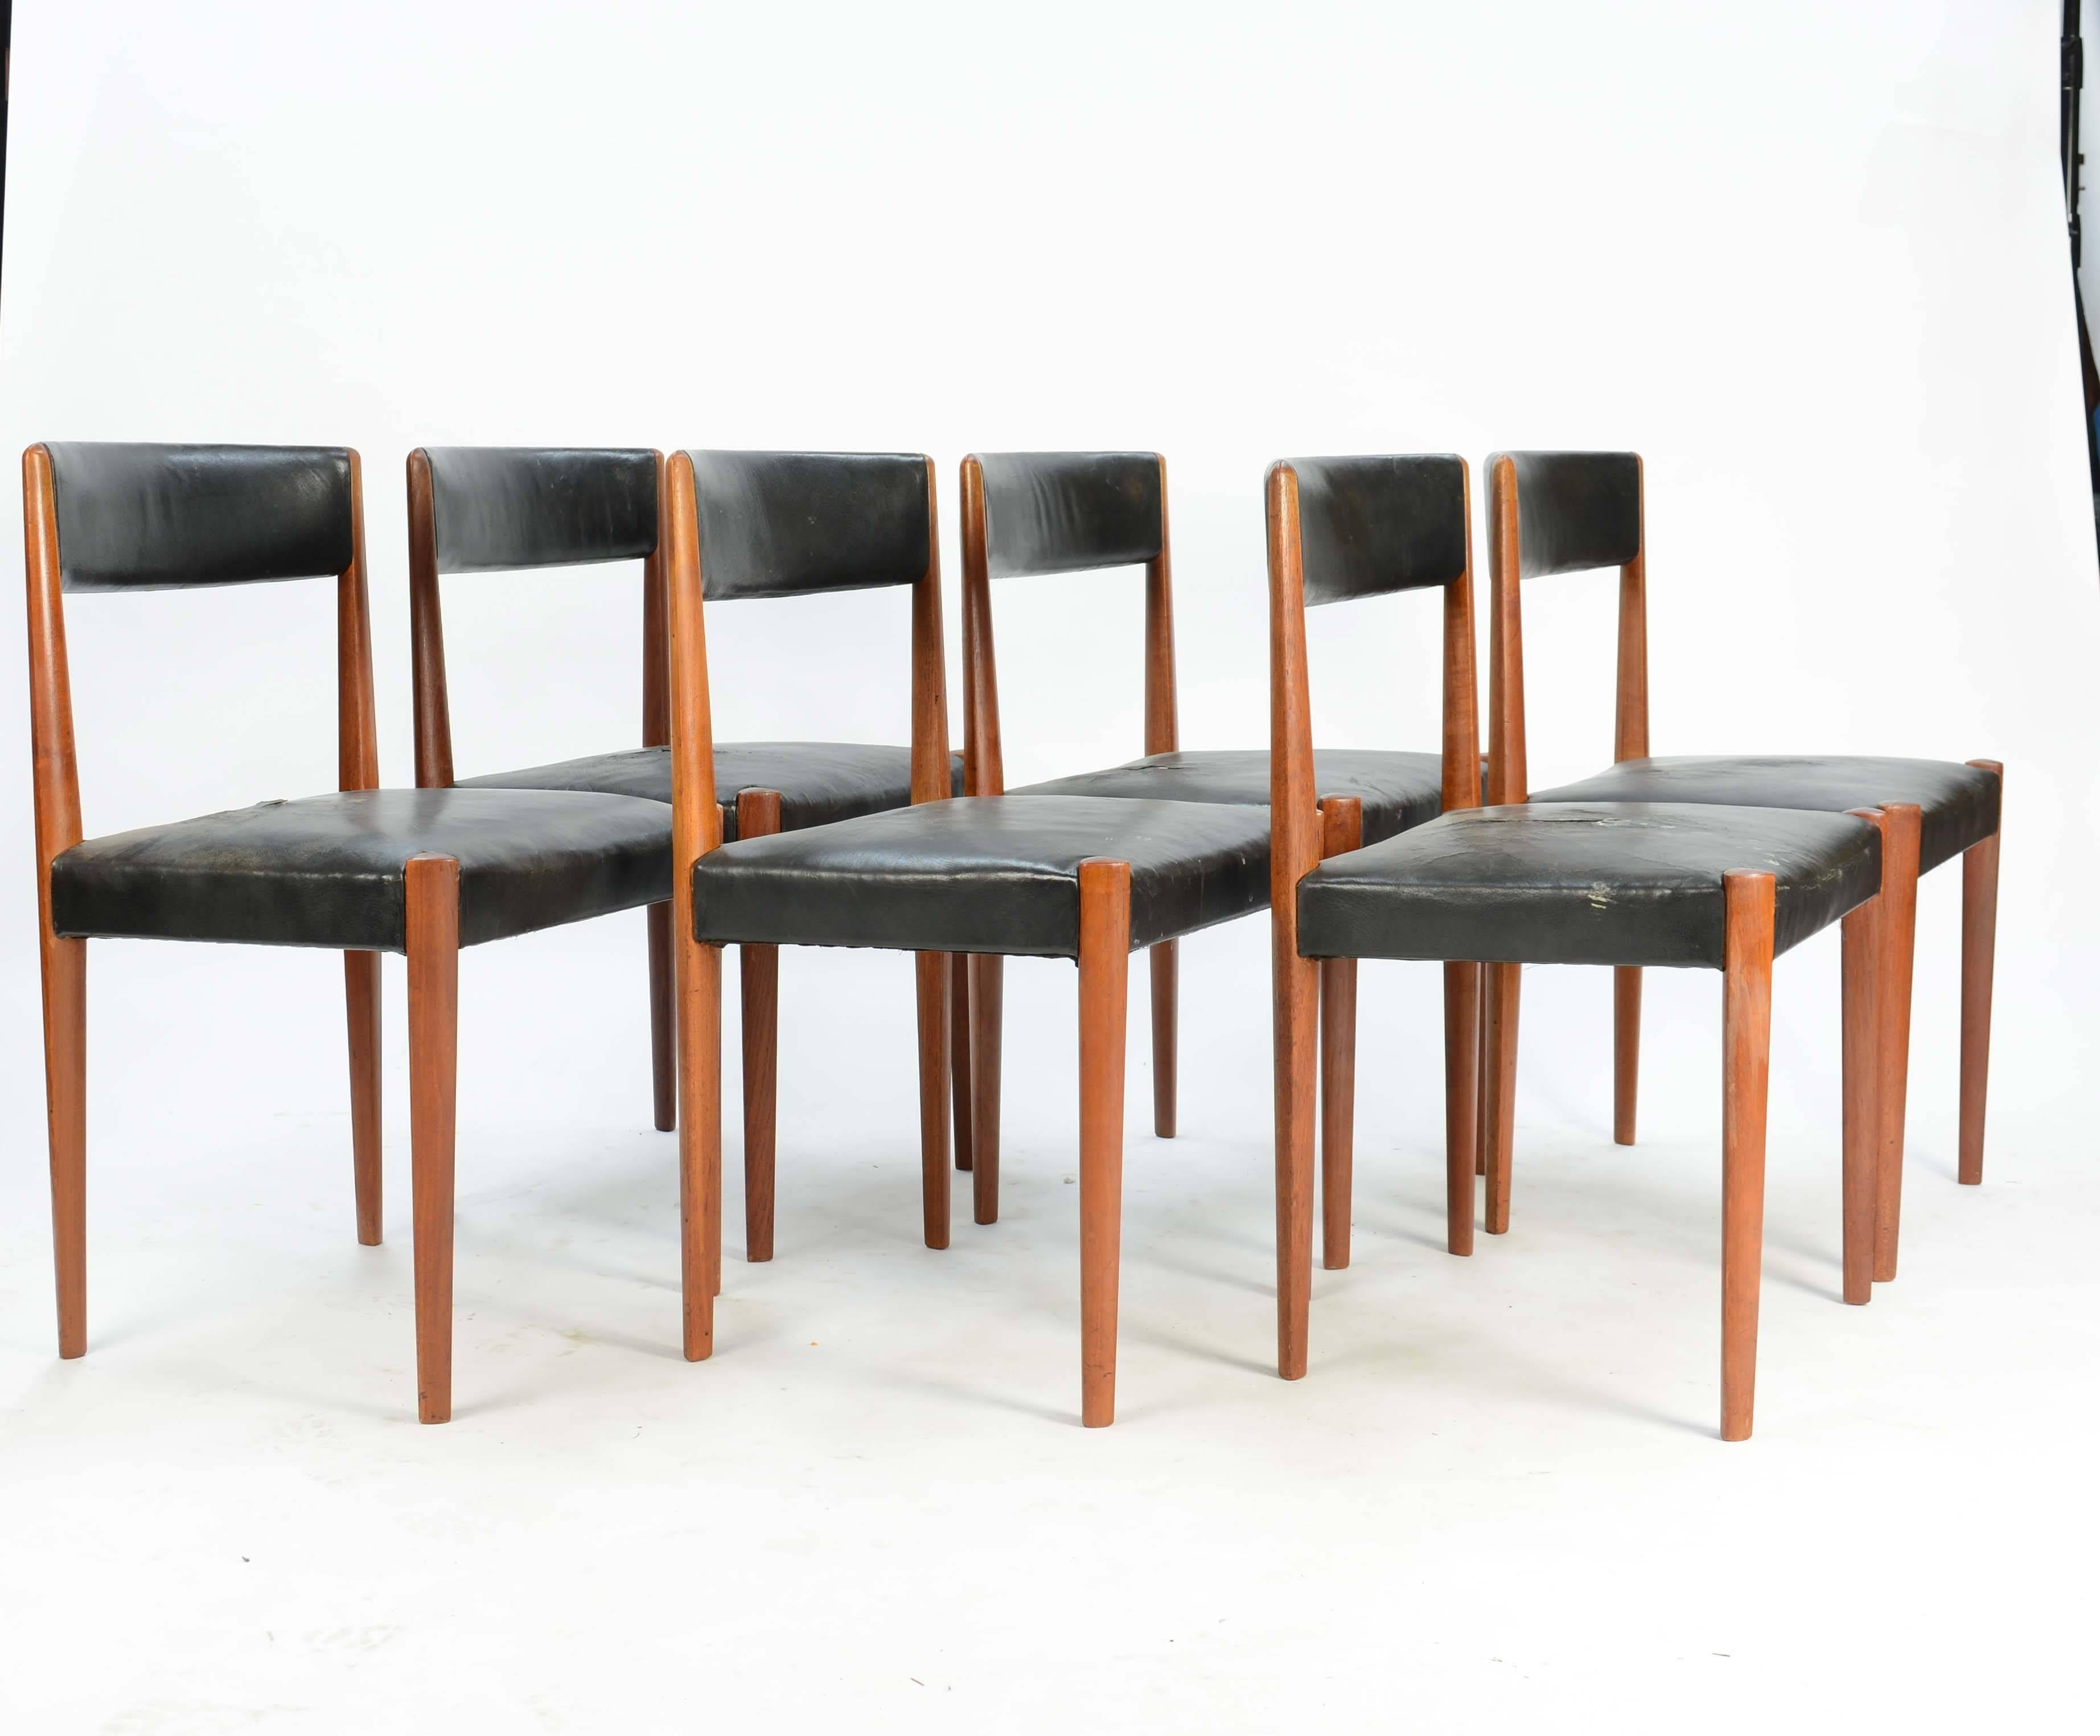 A set of six sculpted dining chairs by Aage Christensen for Fritz Hansen that features the sculpted diamond legs and distressed leather seat. These chair are elegant and understated in their refinement. These are Fritz Hansen model 4112.